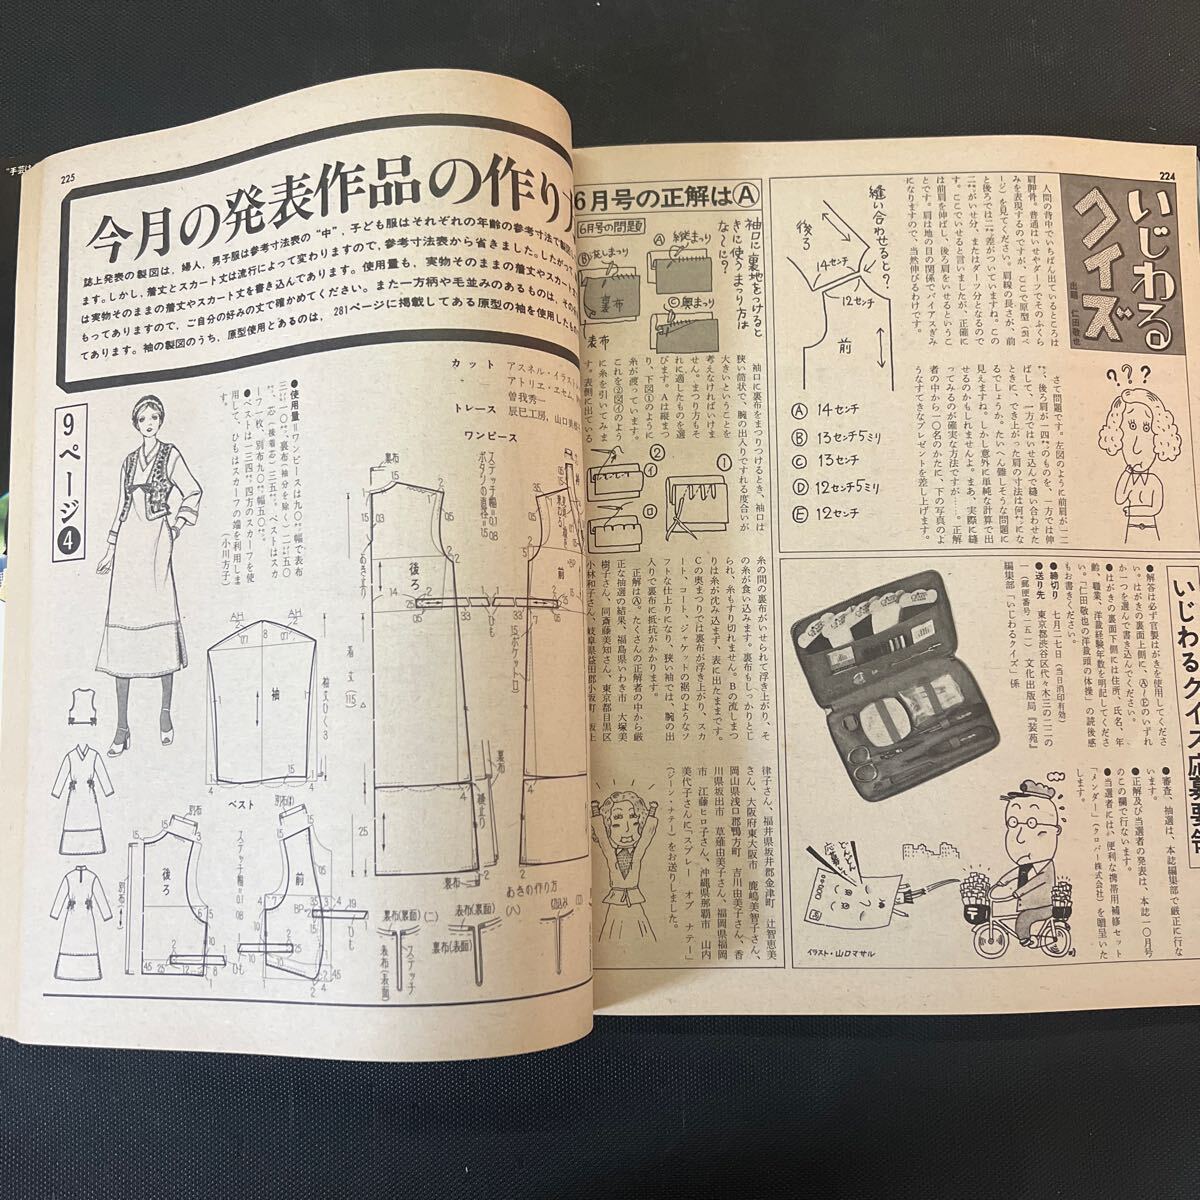  equipment . magazine so-en 1975 year 8 month number culture clothes equipment .. publish department Showa era 50 year that time thing Vintage rare retro secondhand book Showa Retro attire research summer vacation Mexico 